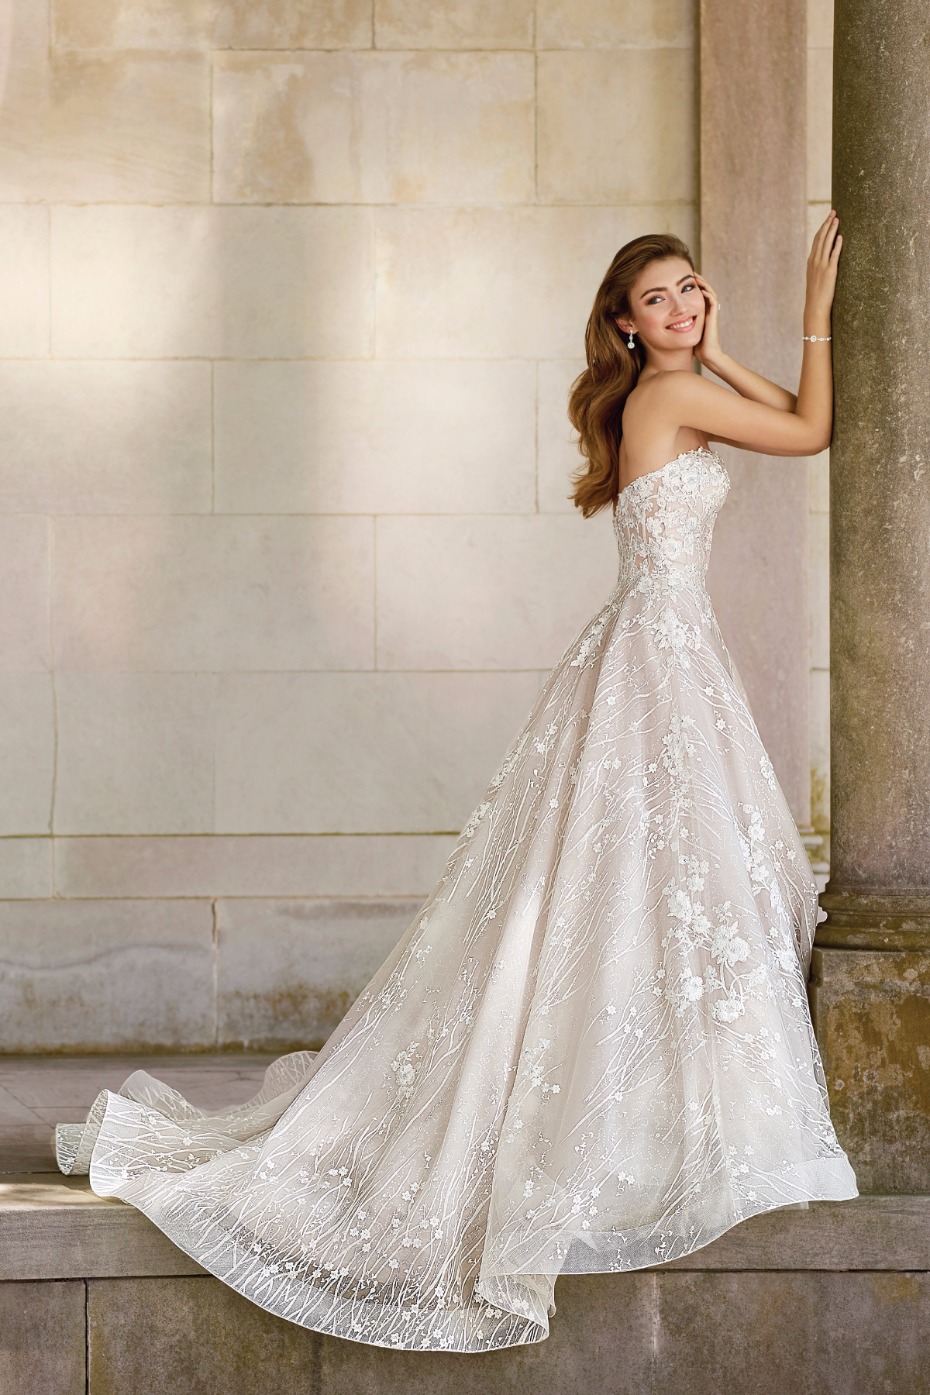 Look like a queen is a gorgeous gown from Martin Thornburg